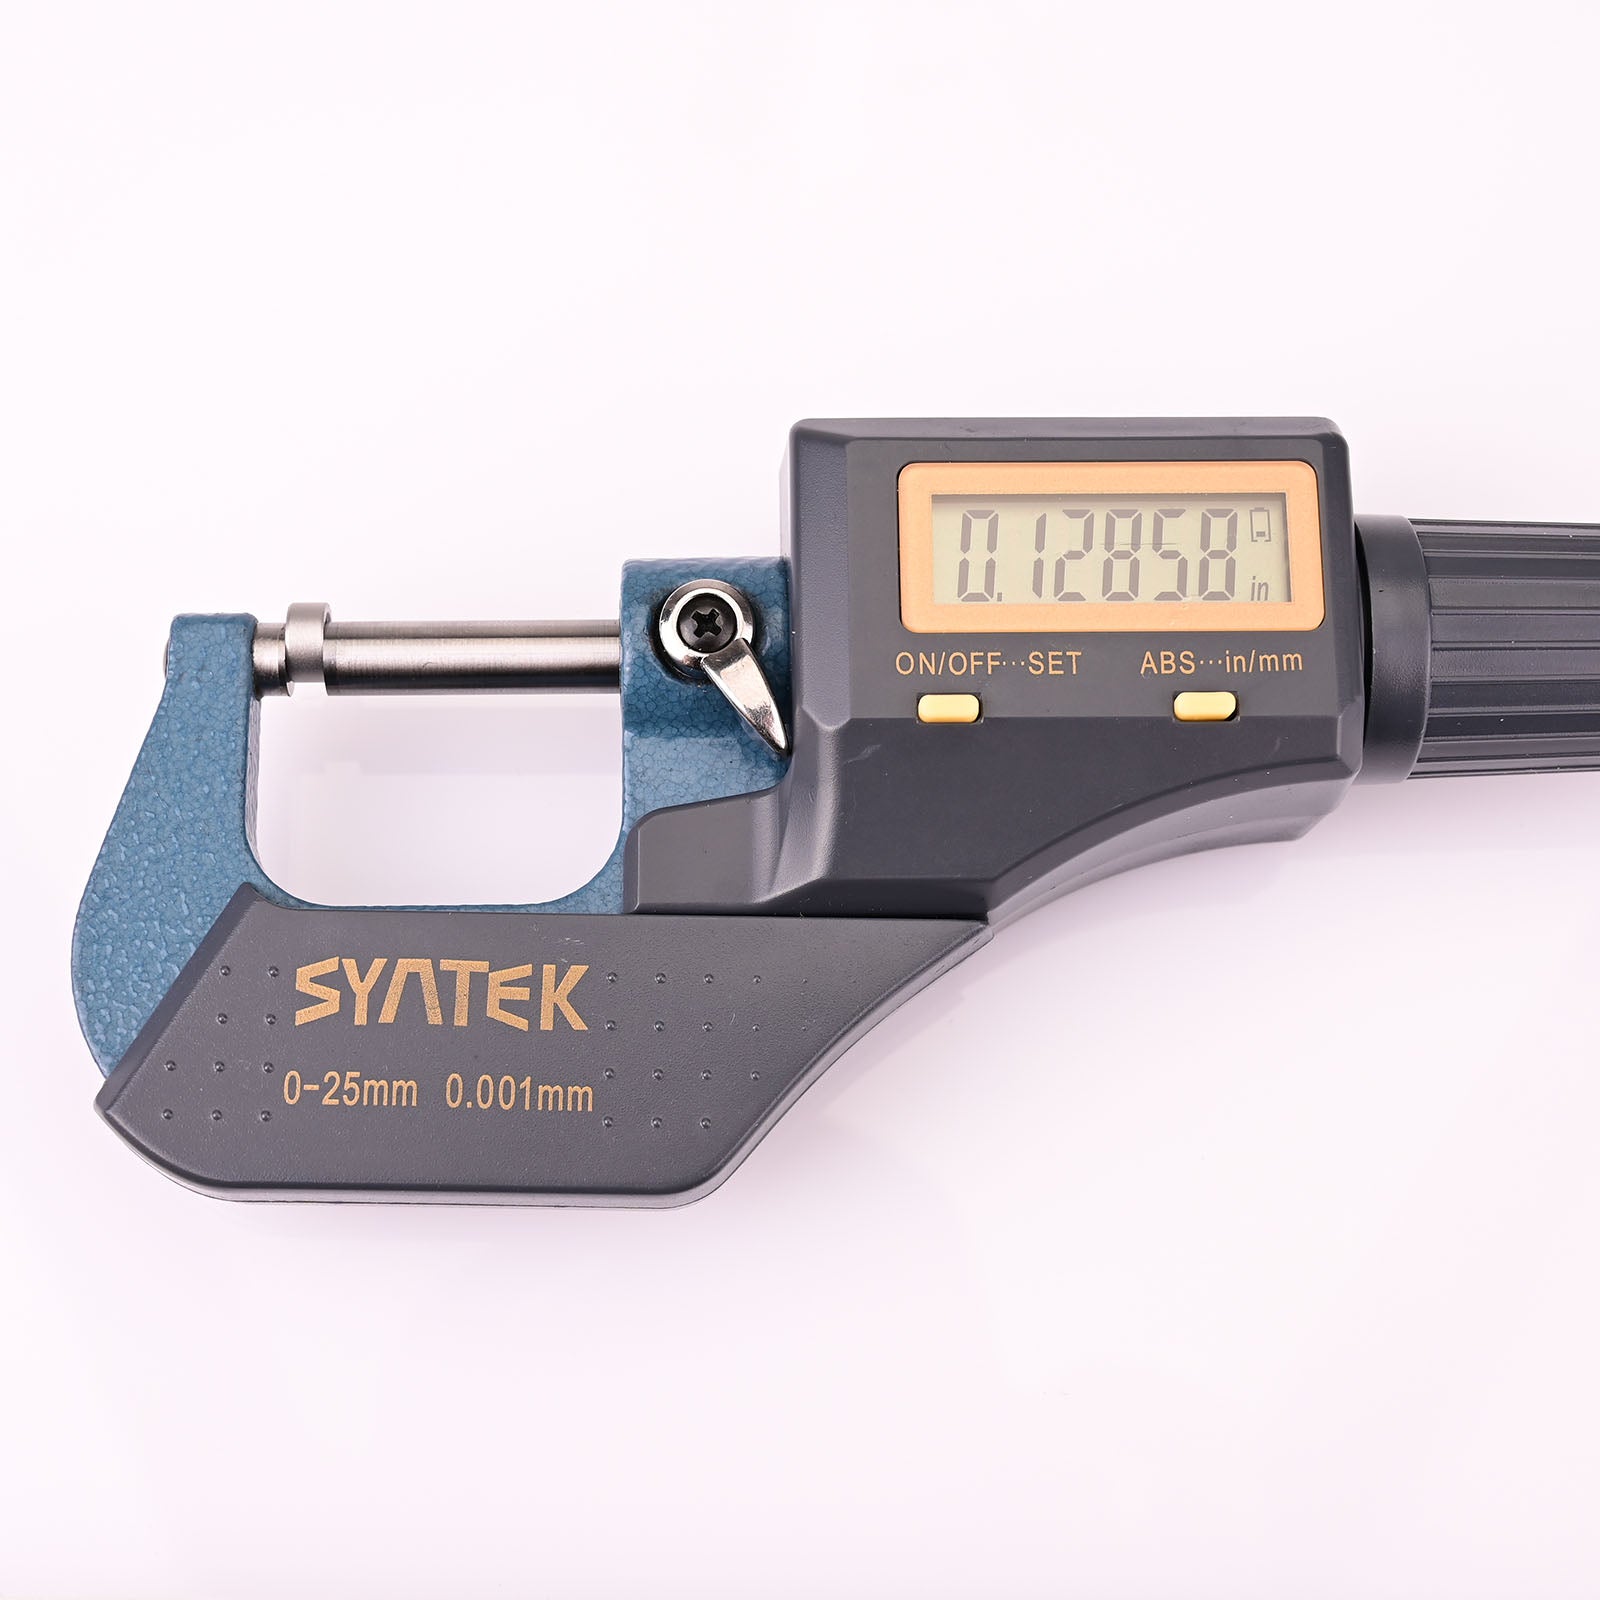 Digital Micrometer For Measuring Bushing -Differnent Number.